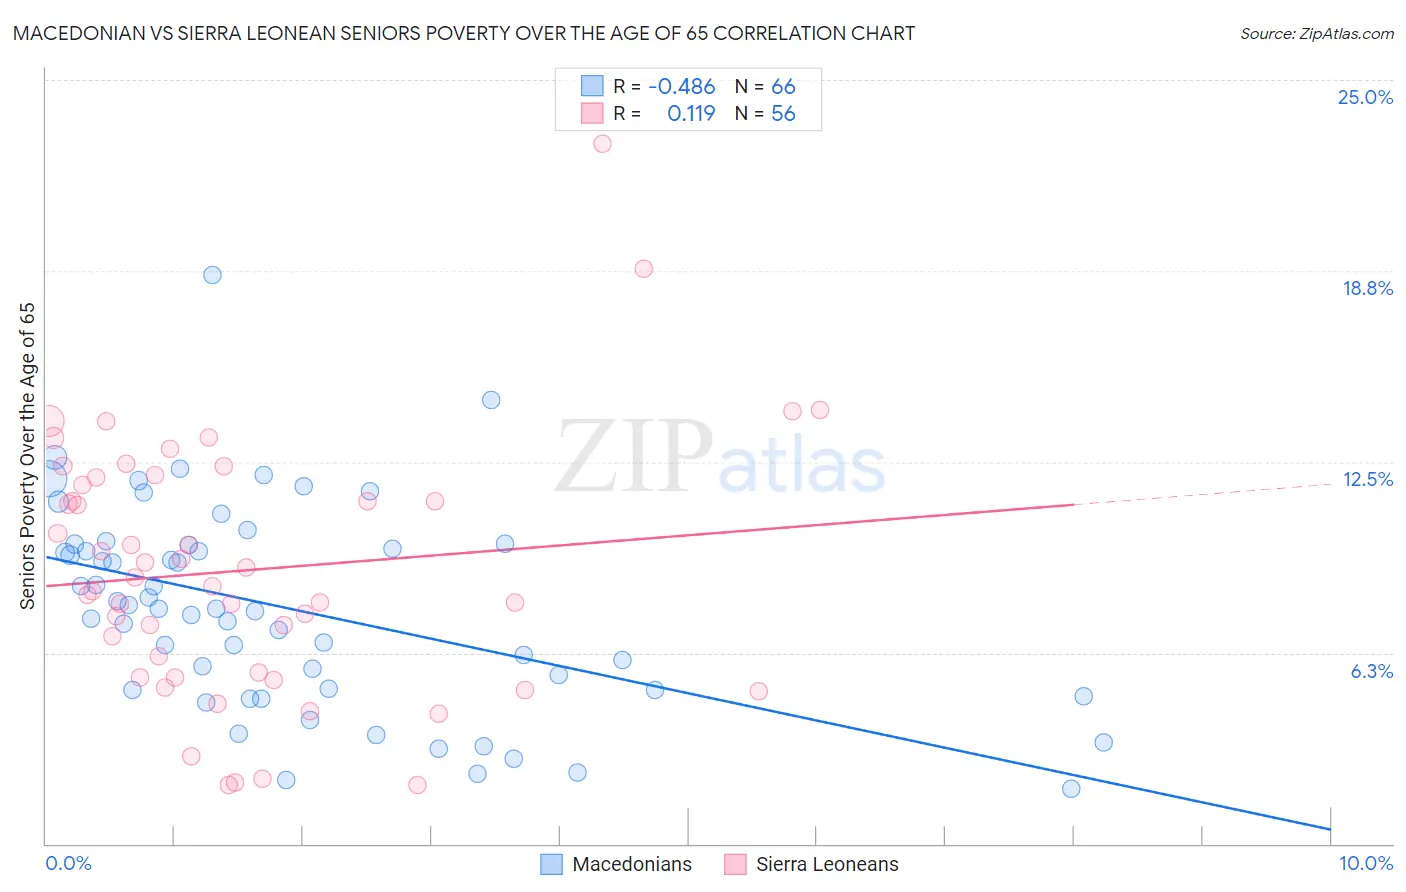 Macedonian vs Sierra Leonean Seniors Poverty Over the Age of 65